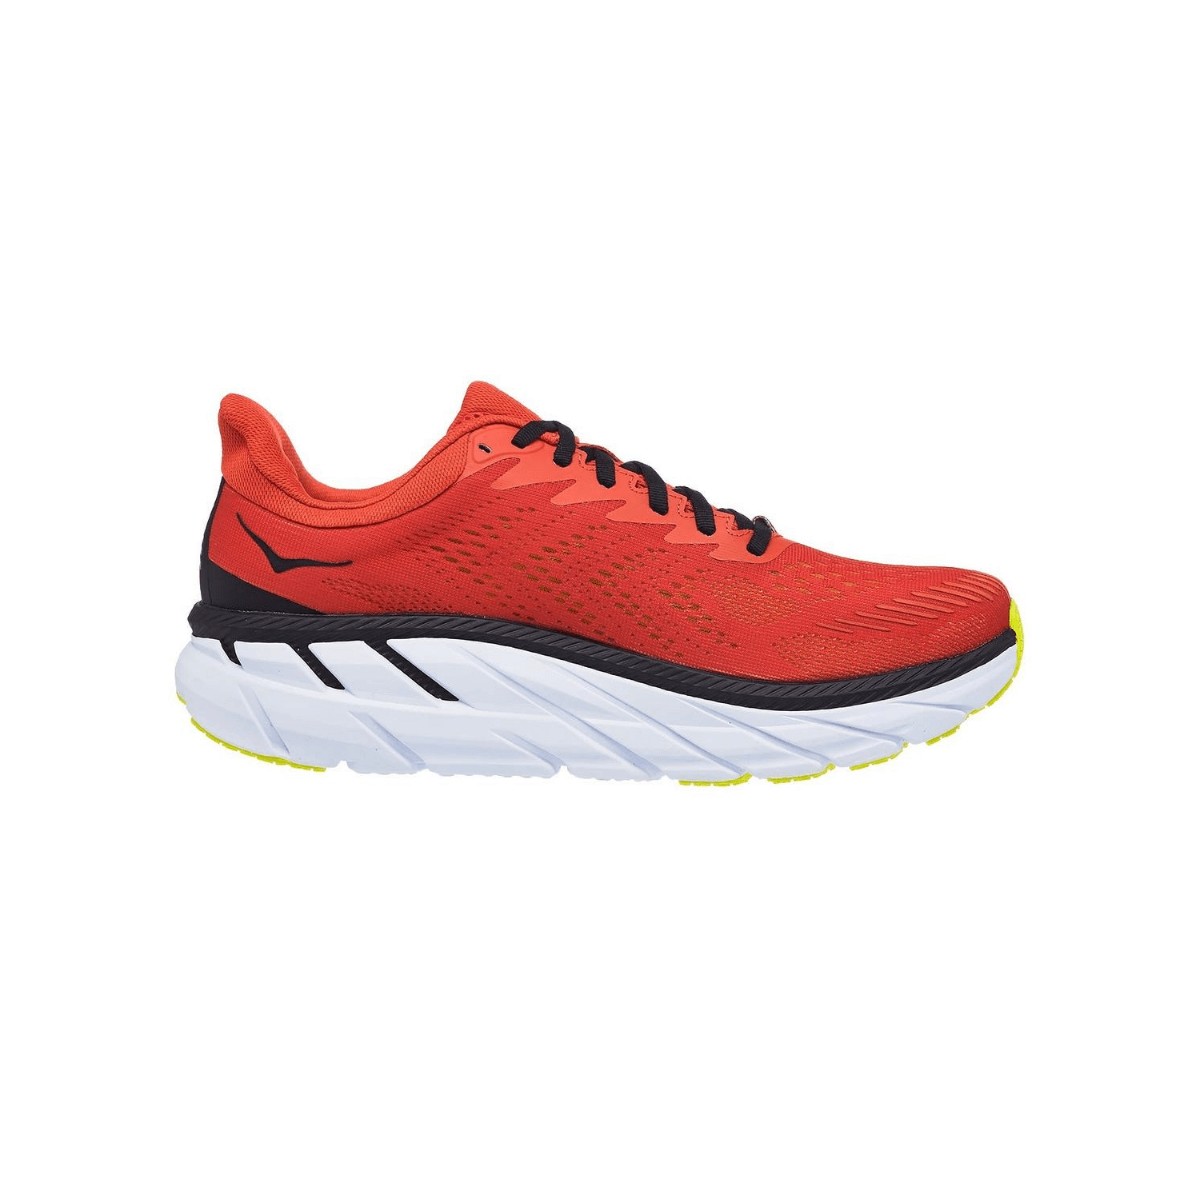 Hoka One One Clifton 7 Shoes Red Black AW20